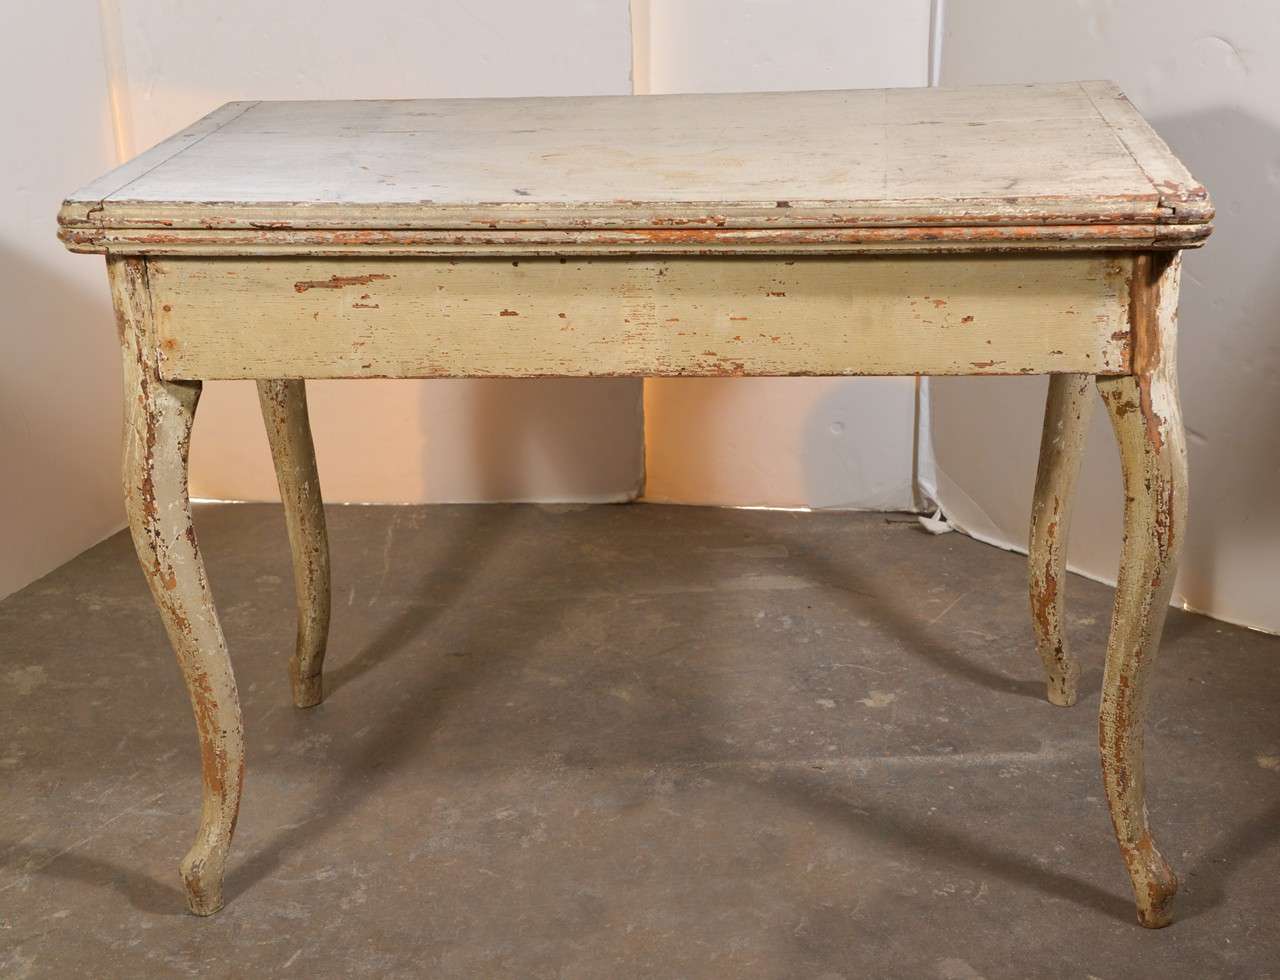 This is an 18th century French table with top that folds open to make a larger table or game table. It's the palest of green/creamy original paint. It has beautiful curvy or cabriolet leg.